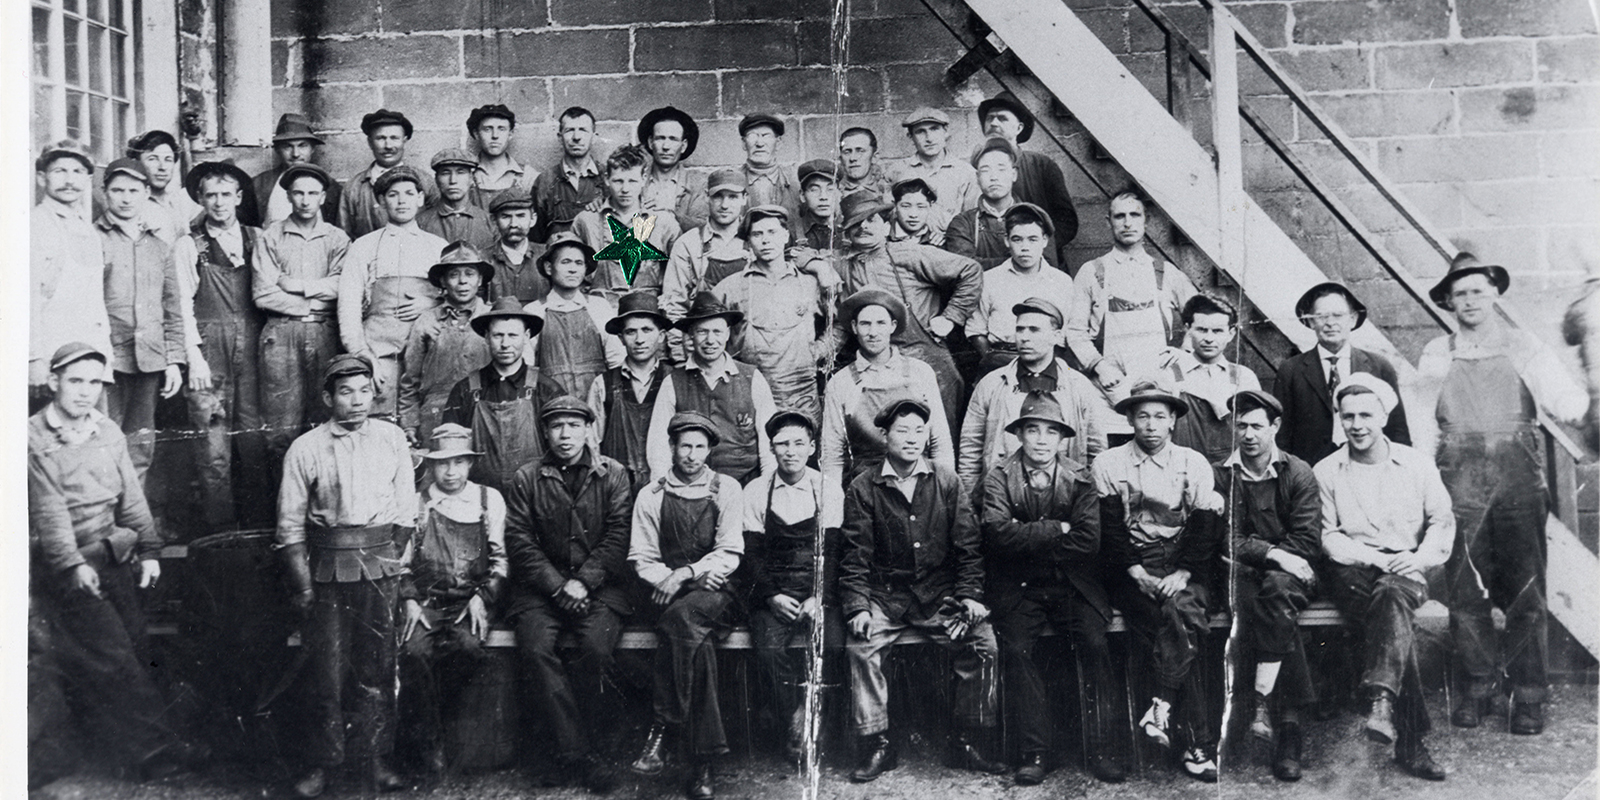 A 1920 photo of a large group of men in workwear posing for a photo in front of stairs and a brick wall